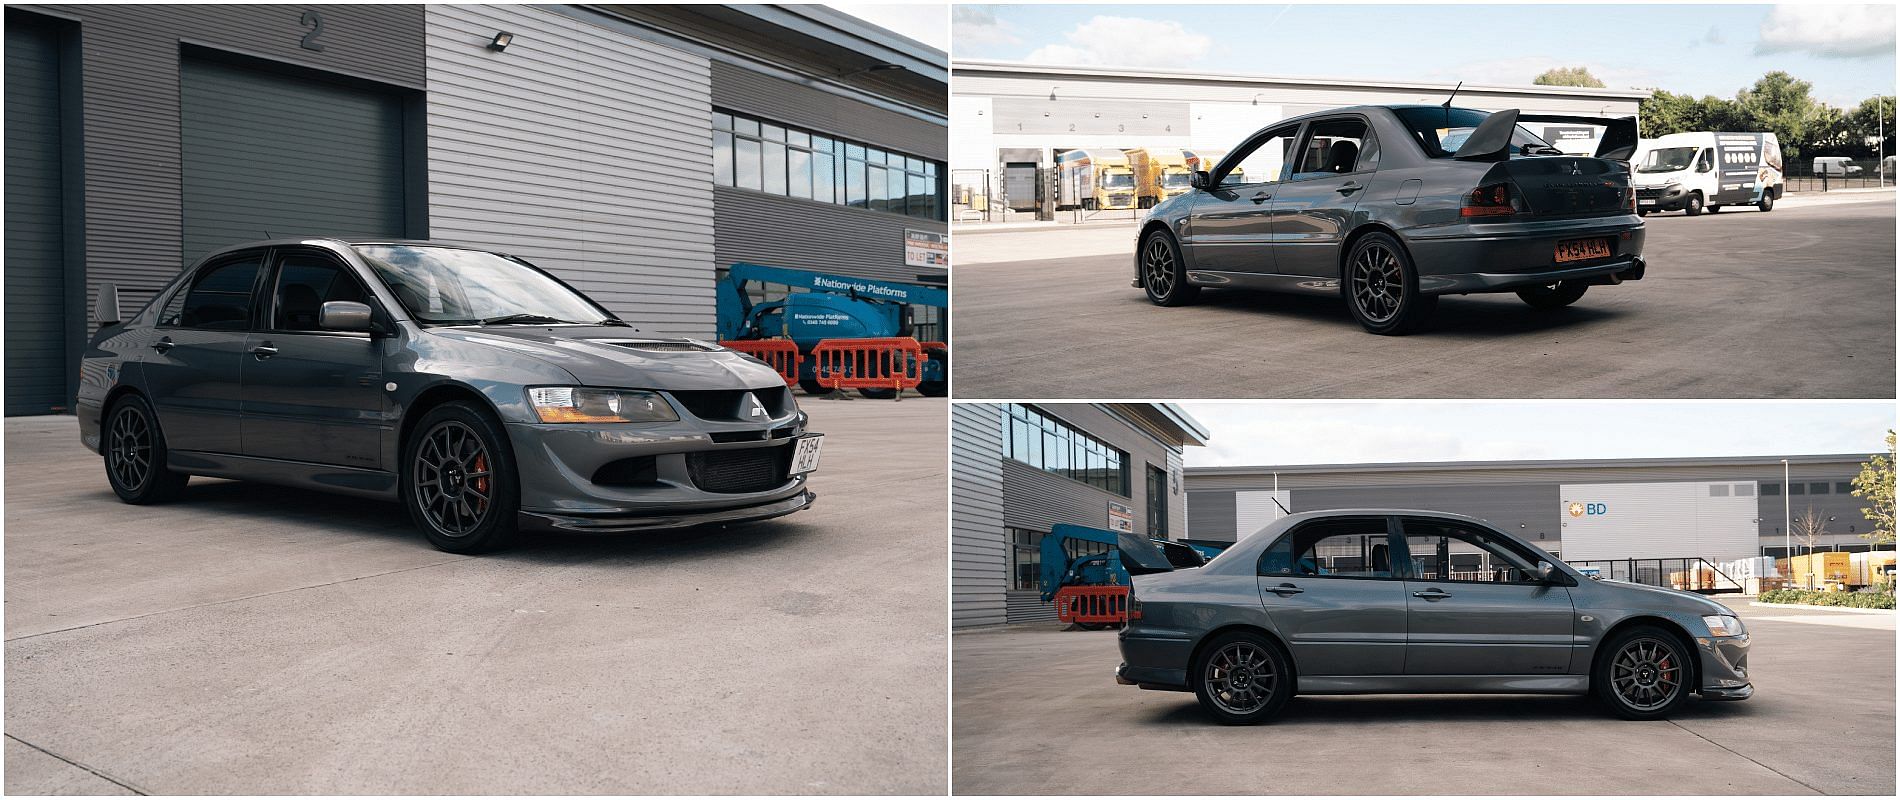 Grey 2004 Mitsubishi Lancer Evolution VIII FQ 340 front, rear and side view